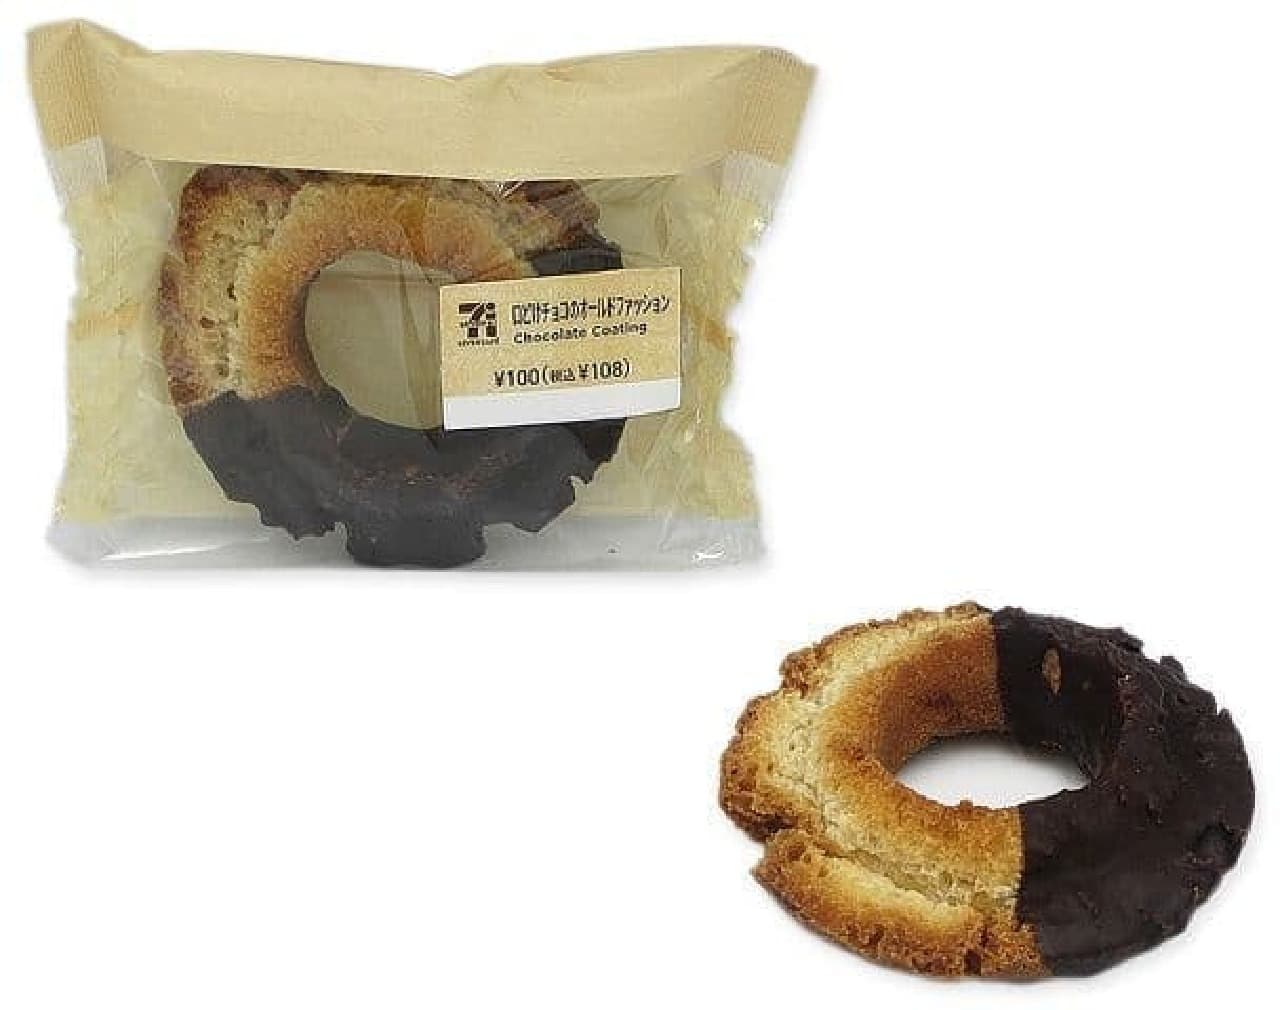 7-ELEVEN "Old-fashioned donut chocolate"